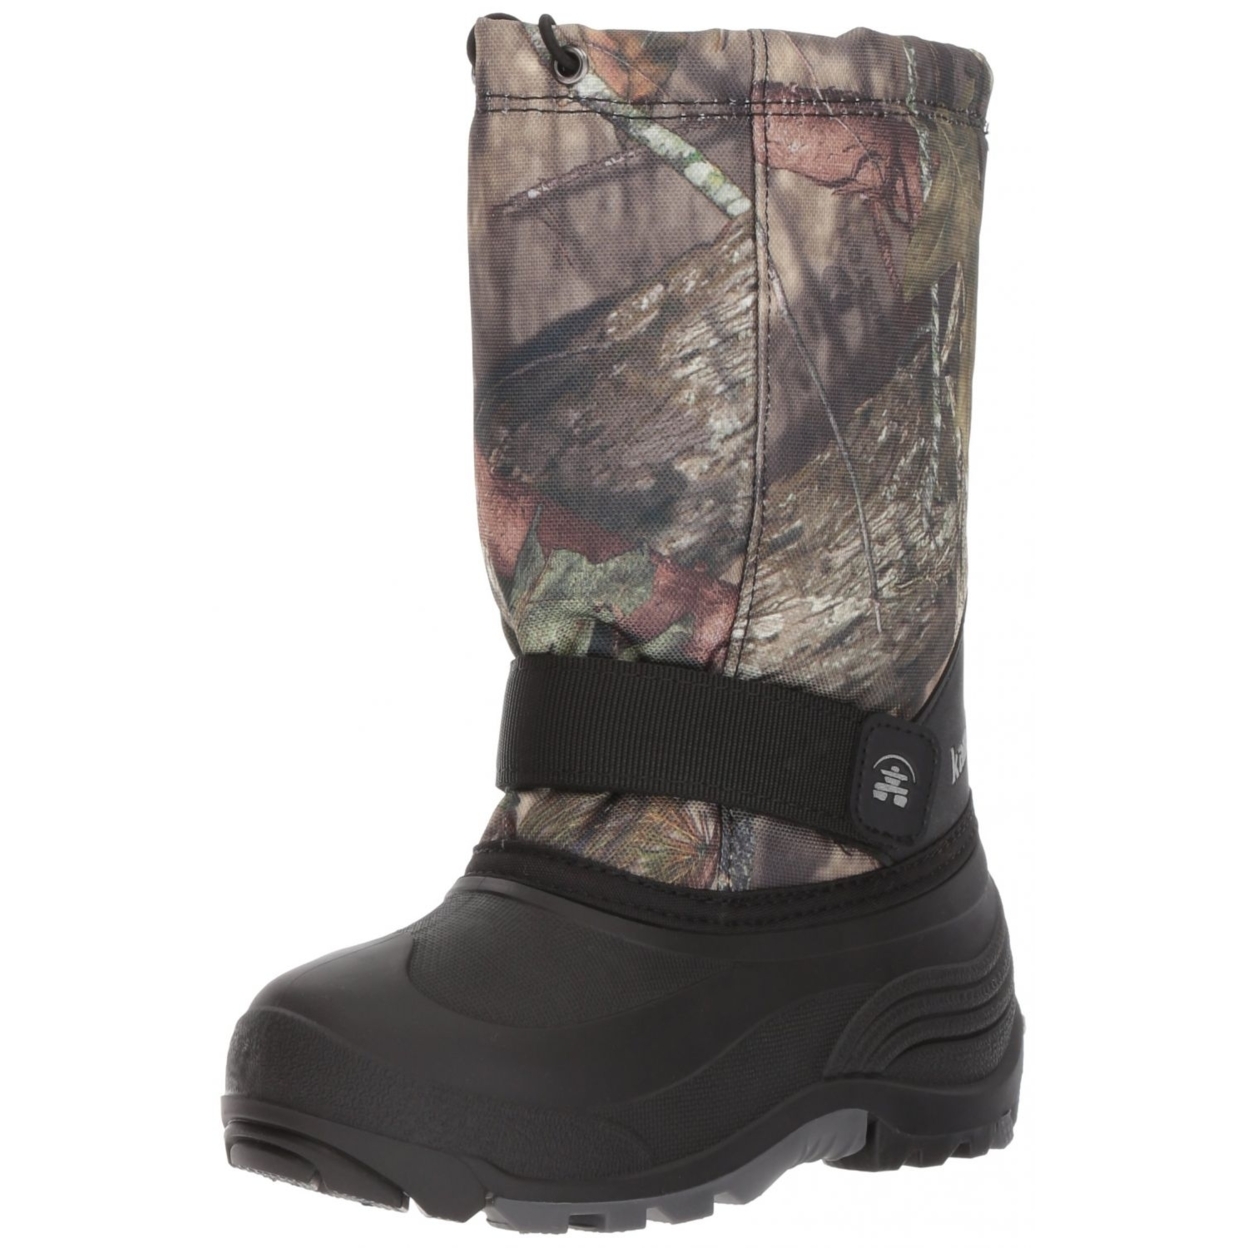 Kamik Rocket Cold Weather Boot (Toddler/Little Kid/Big Kid) 9 Toddler MOSSY OAK COUNTRY CAMO - MOSSY OAK COUNTRY CAMO, 5 Big Kid